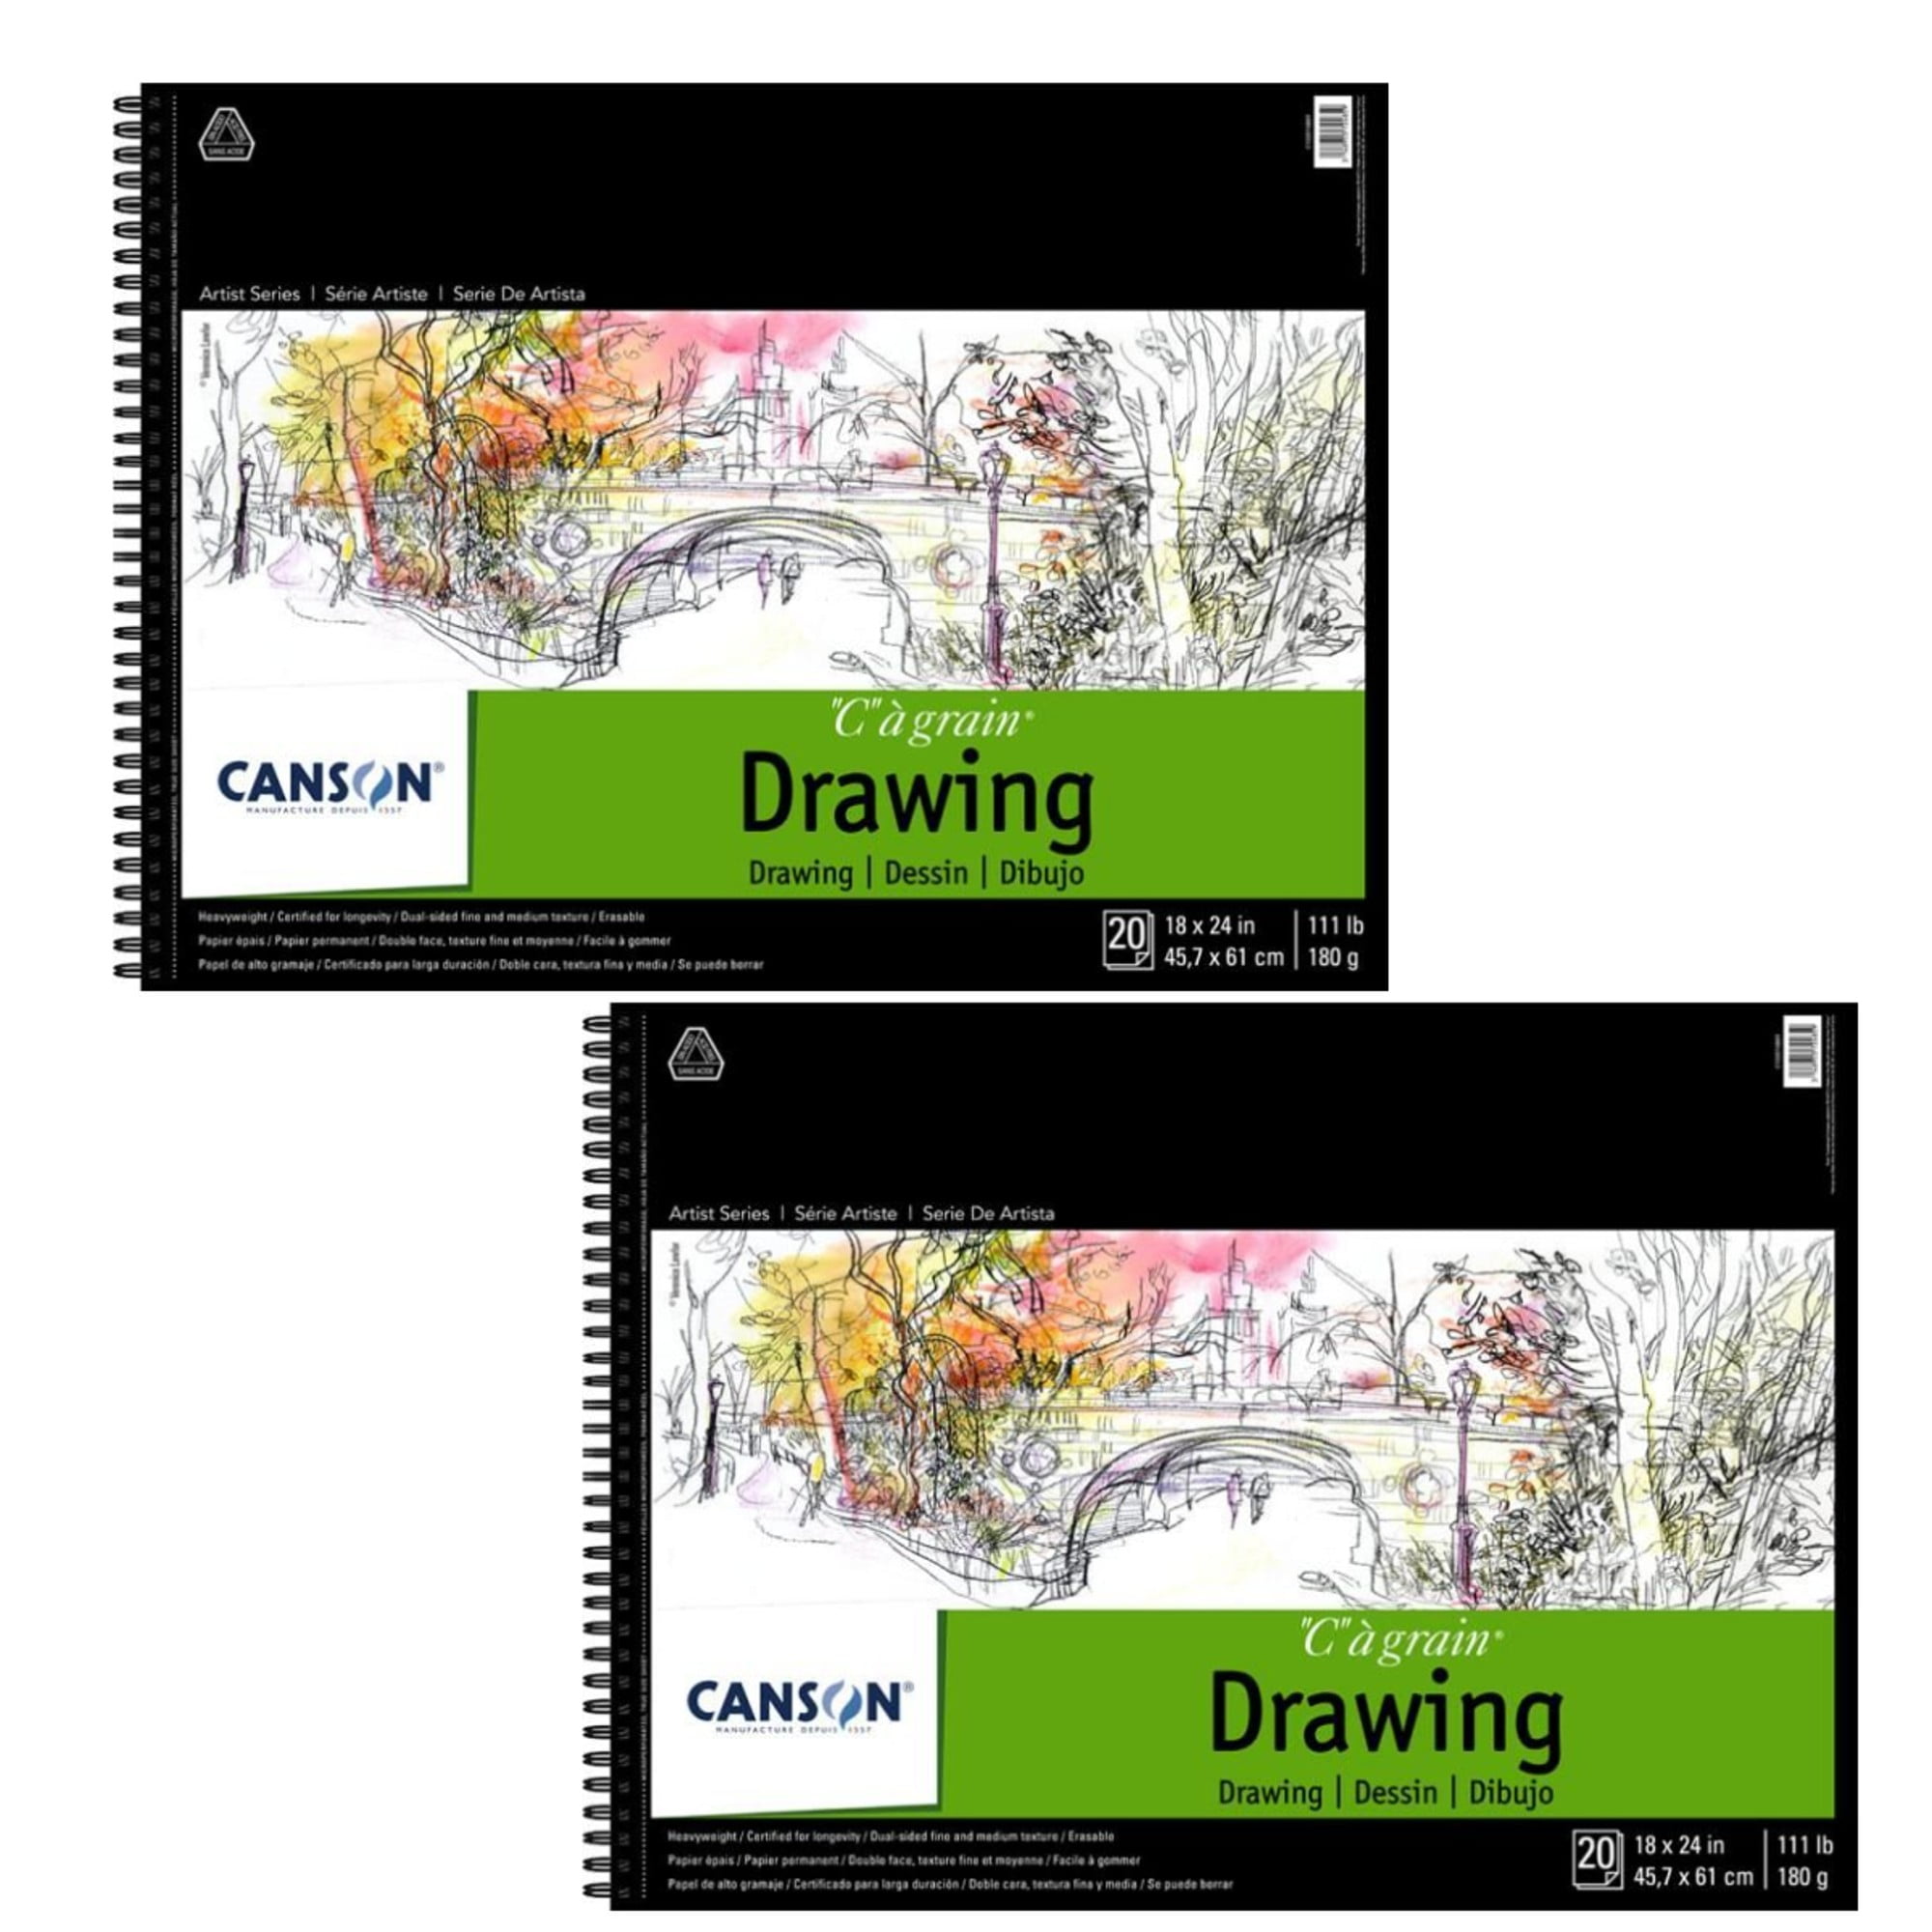  Canson Artist Series Drawing Paper, Wirebound Pad, 18x24  inches, 24 Sheets (80lb/130g) - Artist Paper for Adults and Students -  Charcoal, Colored Pencil, Ink, Pastel, Marker : Arts, Crafts & Sewing